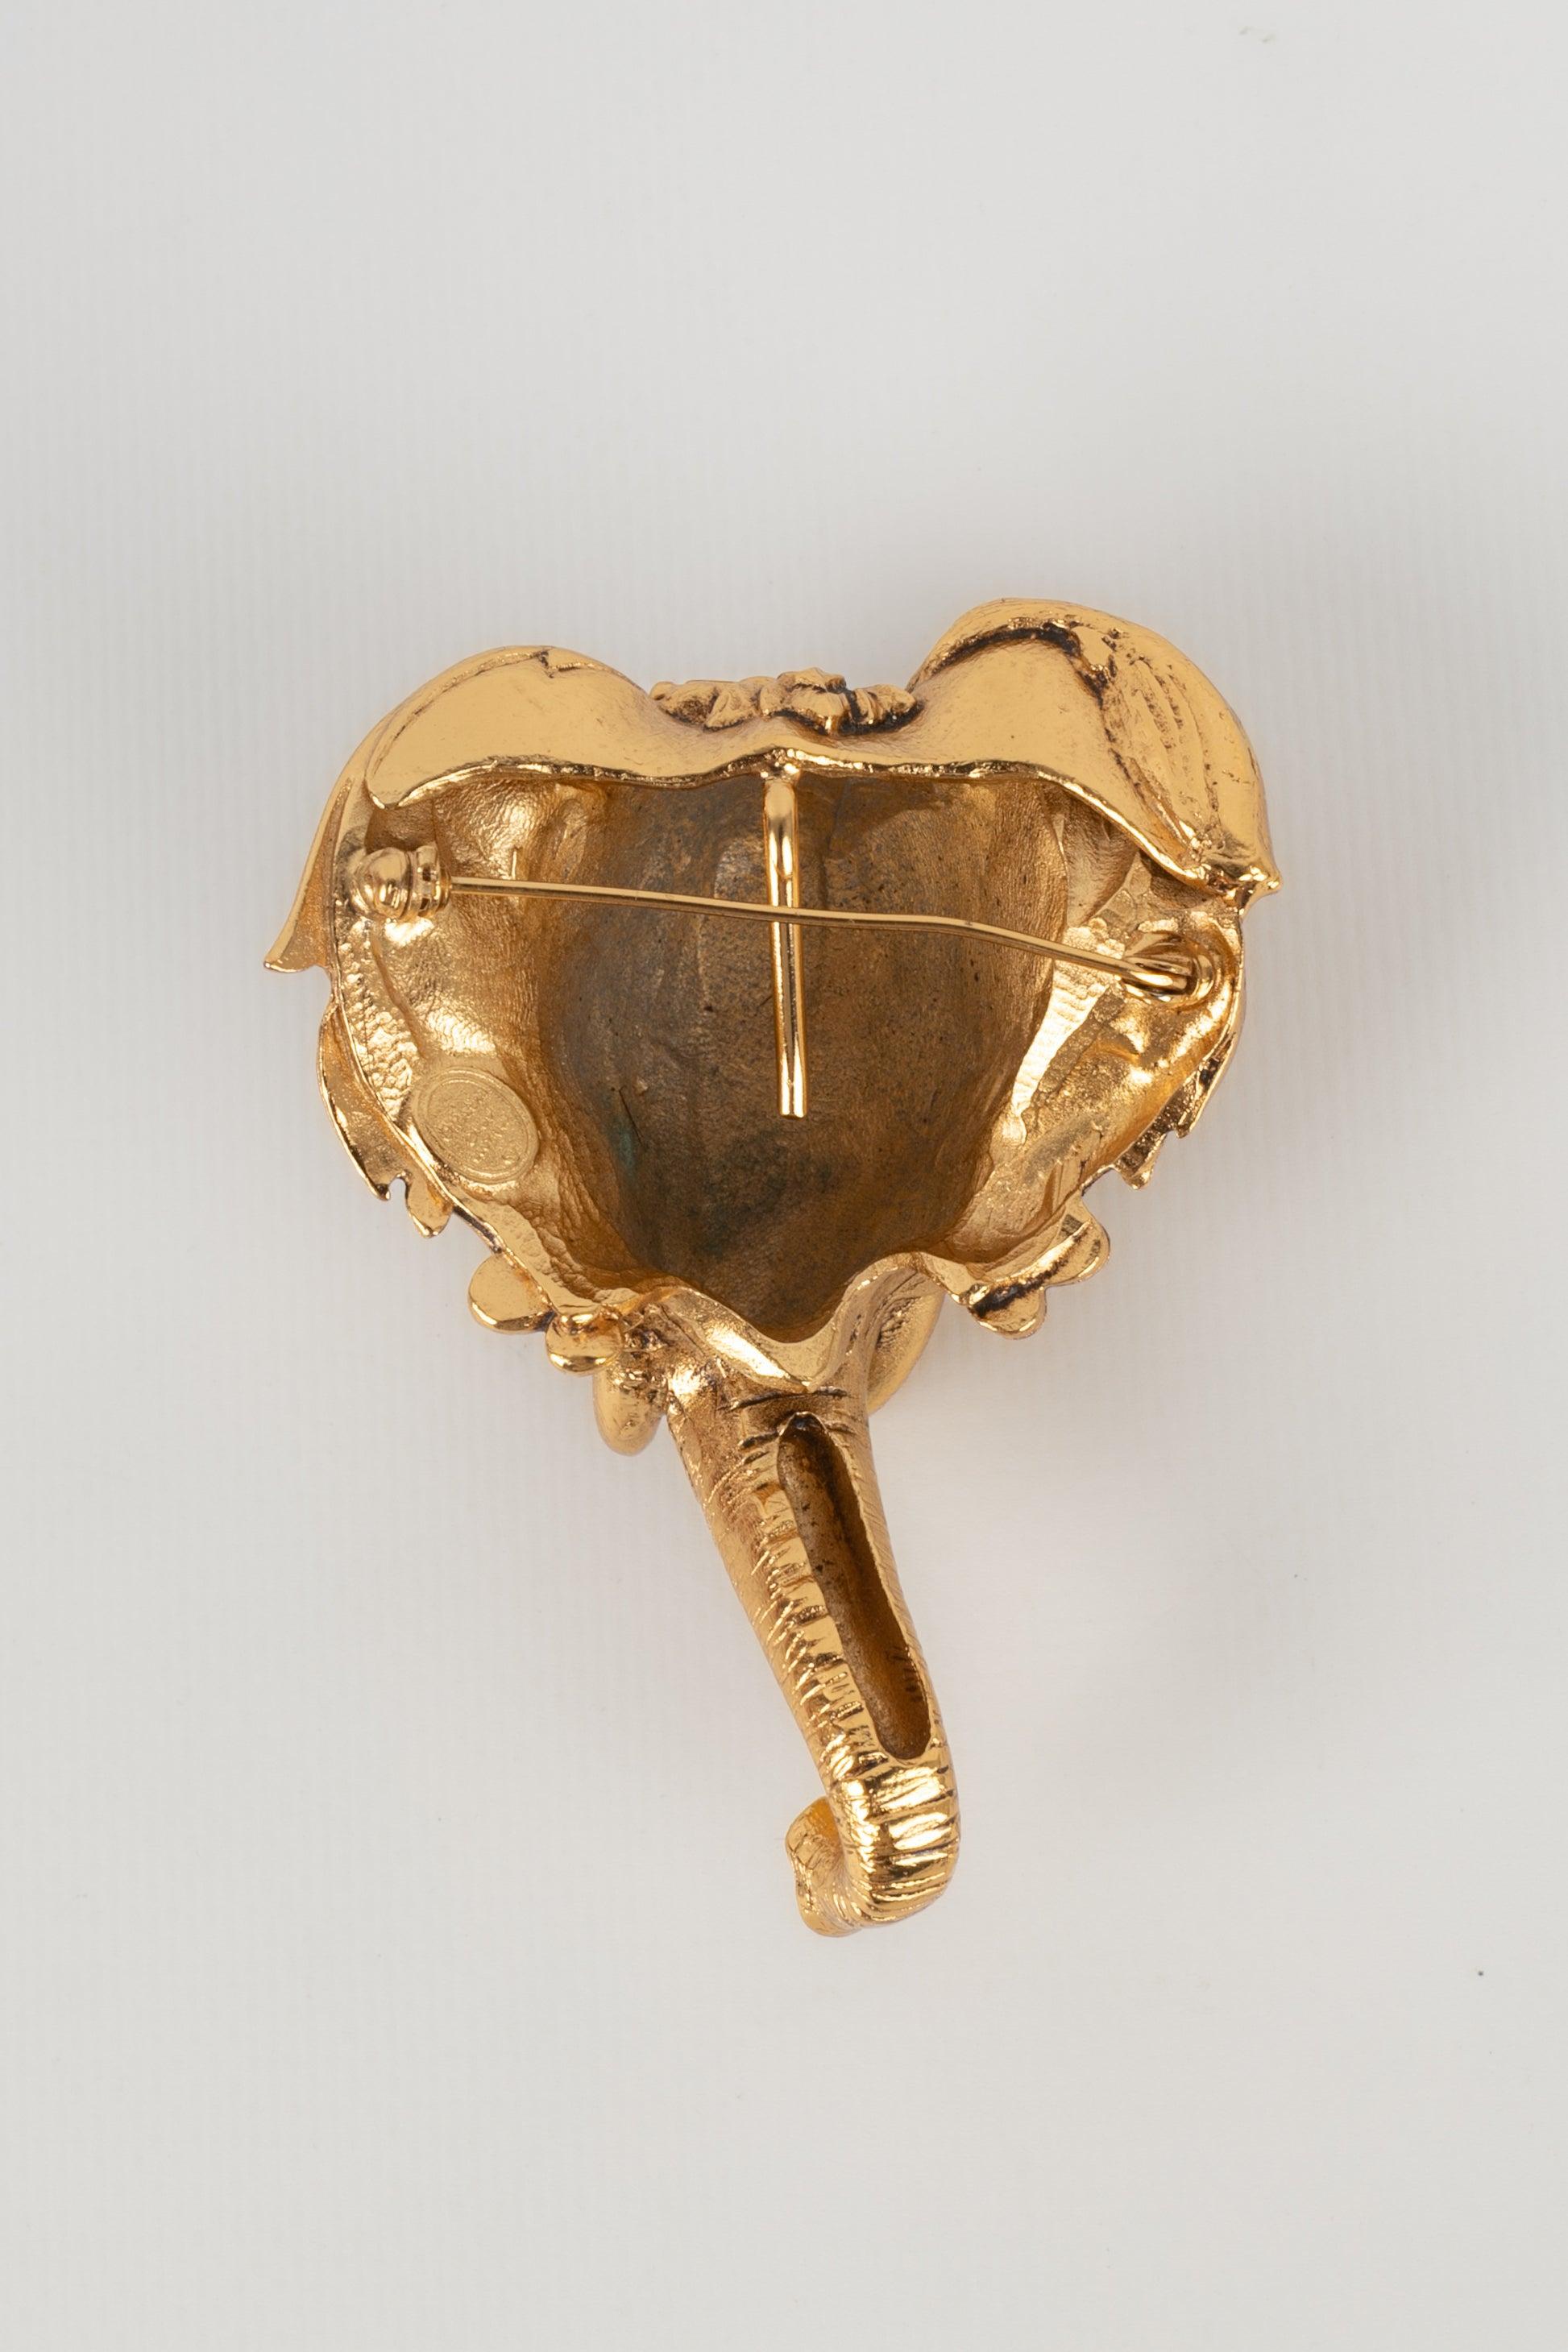 Christian Dior Gold-Plated Metal Pendant Brooch Depicting an Elephant Head For Sale 2